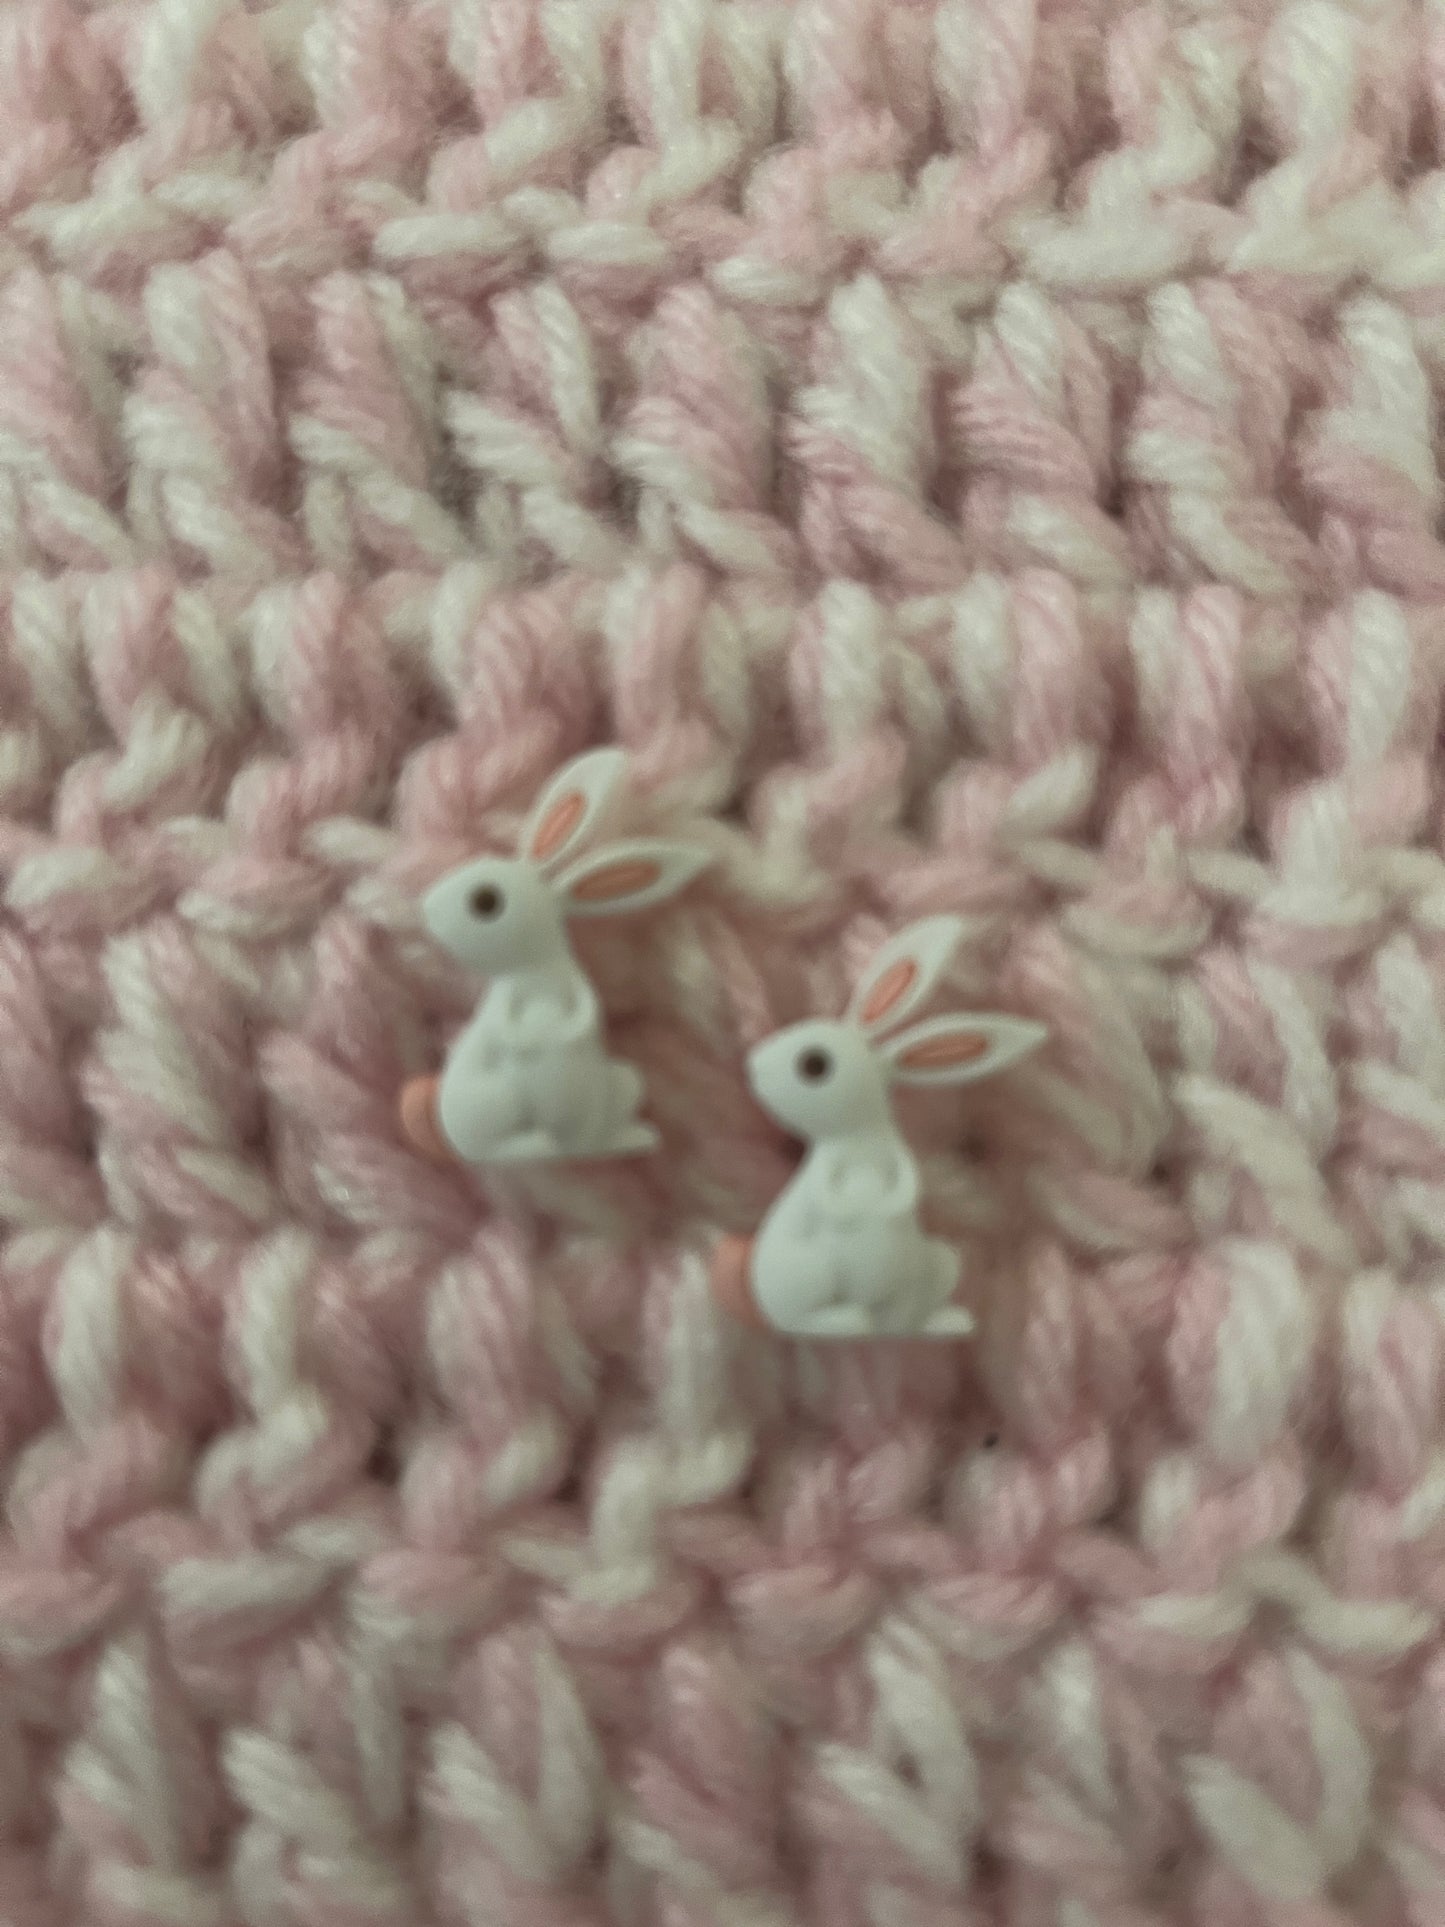 White Bunny Stud EarringsPink tiful of LOVE